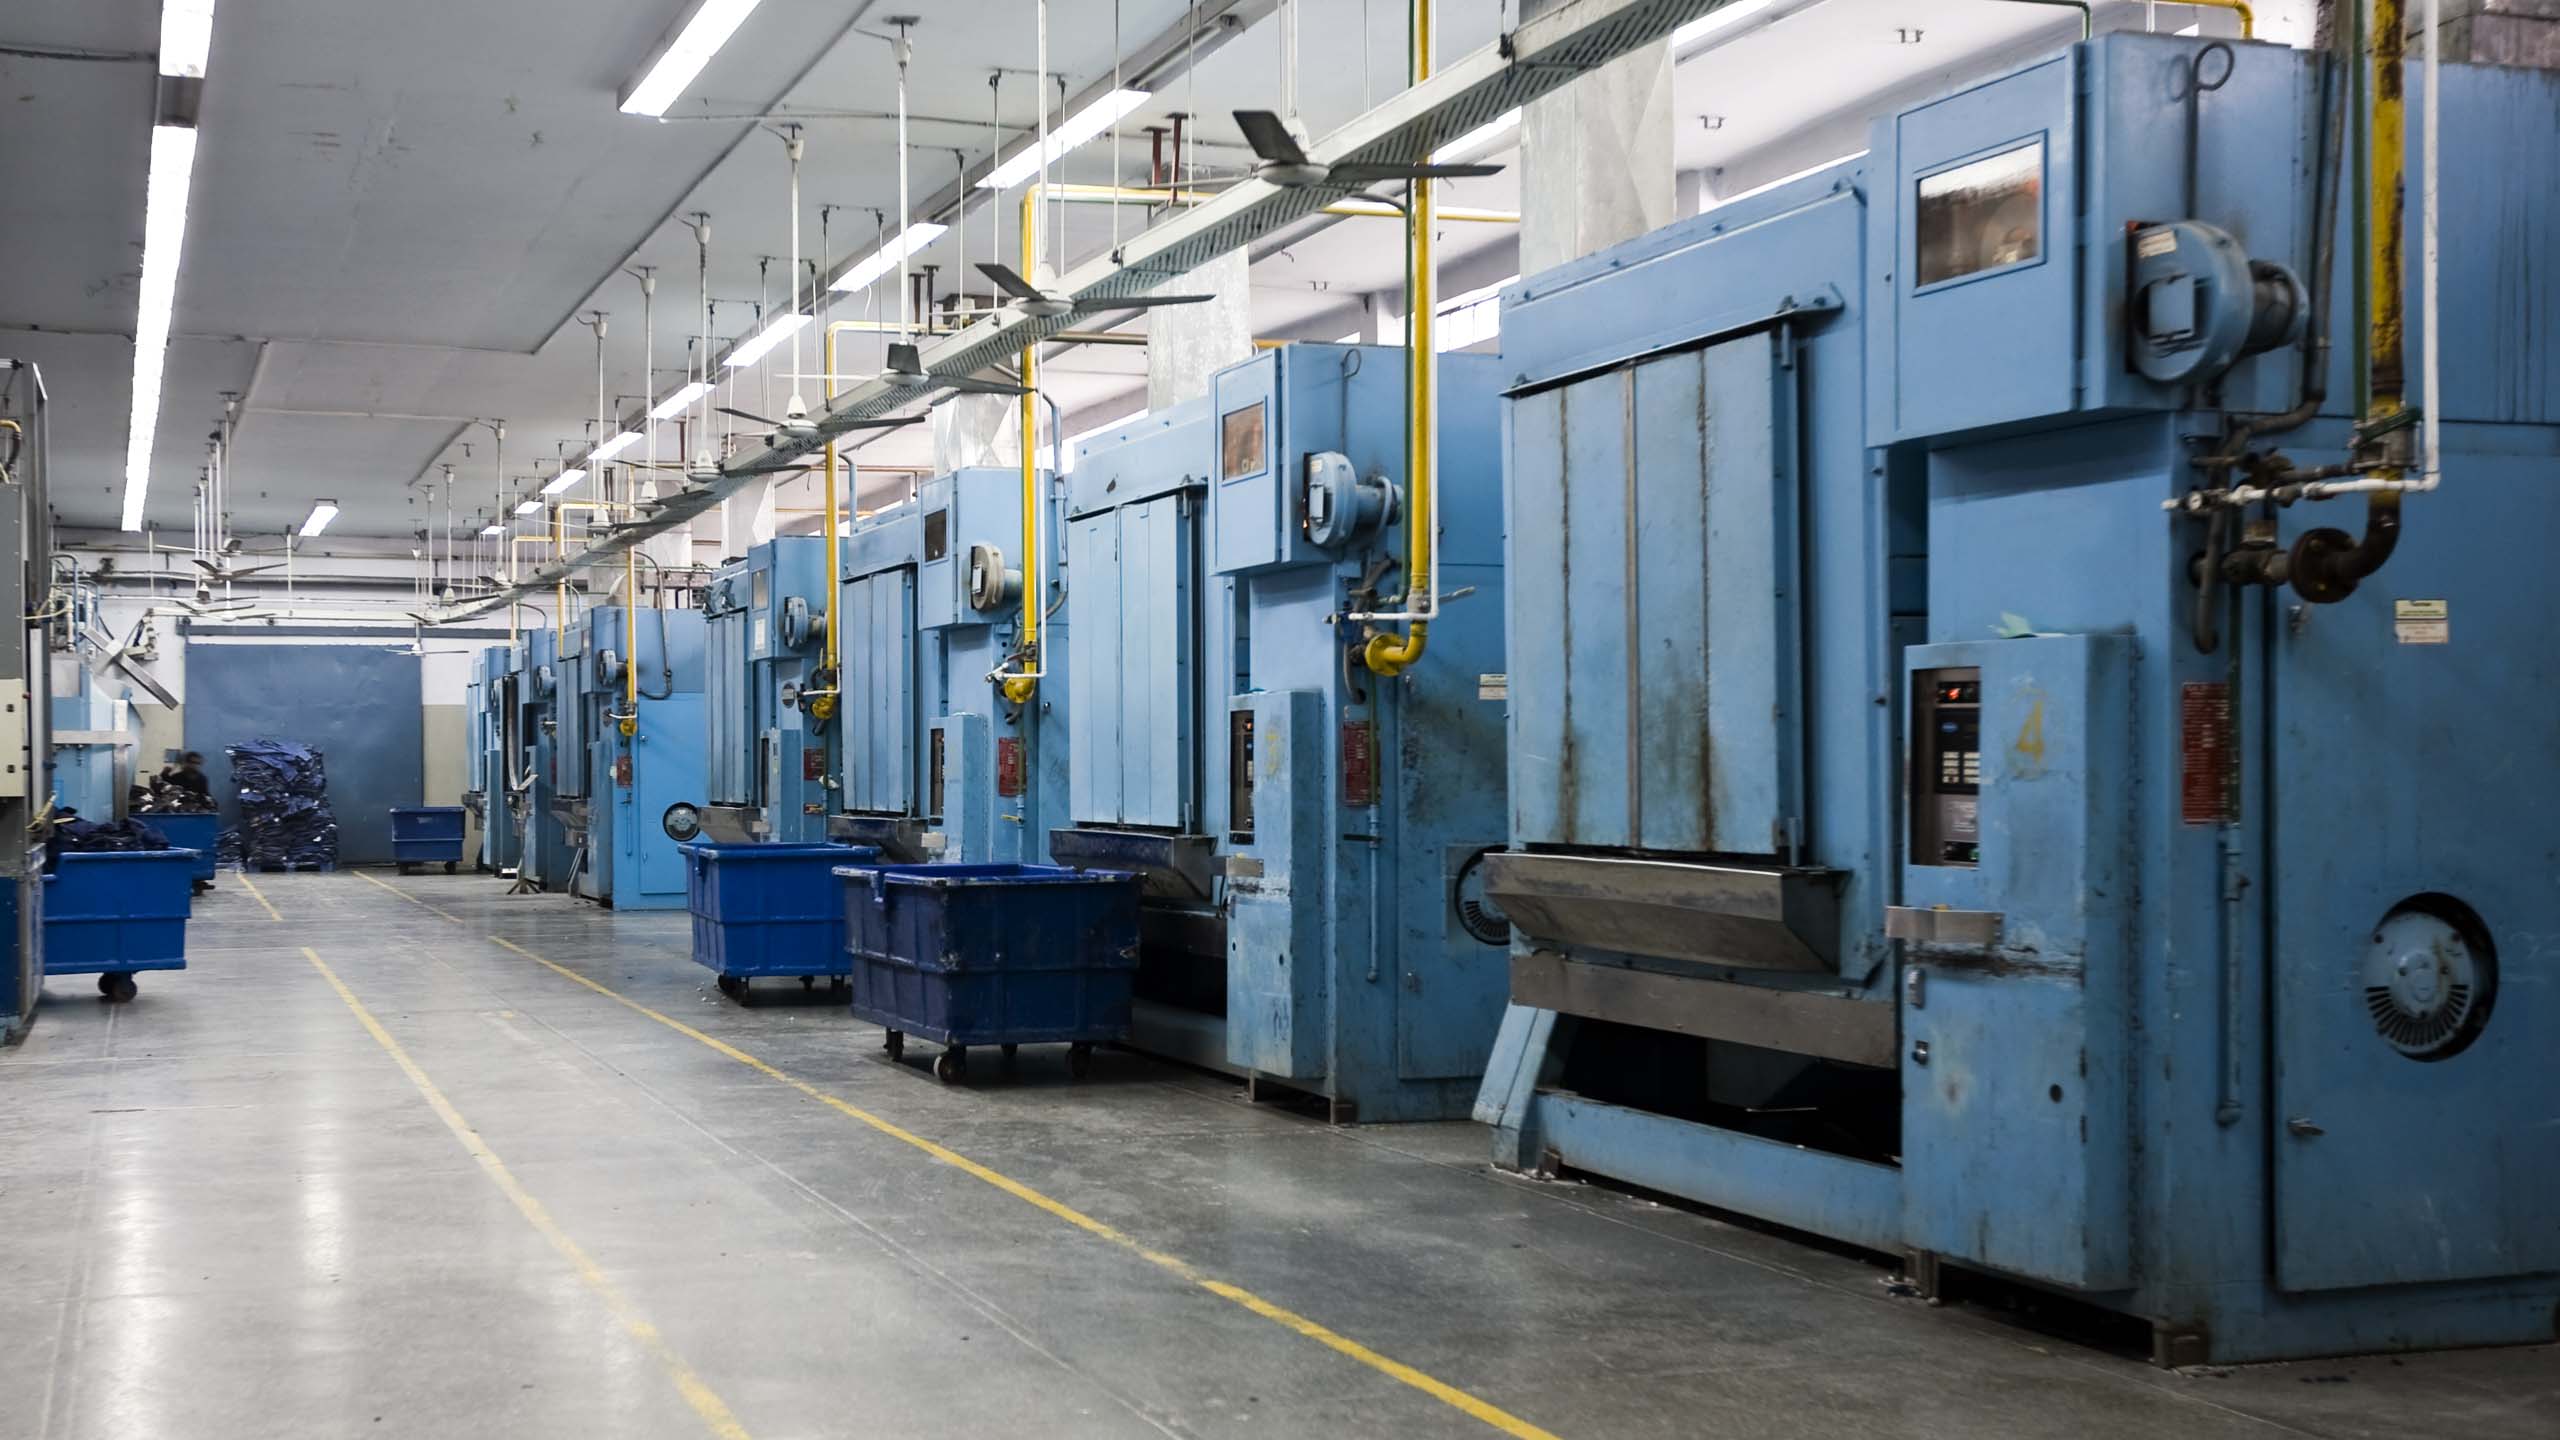 A state loaded with resorts and hotels, Arizona is home to many industrial laundry facilities. We’ve worked with Mission Linen, ALSCO and Prudential Overall Supply on numerous cost-saving solutions. We also stock and supply many common replacement parts.